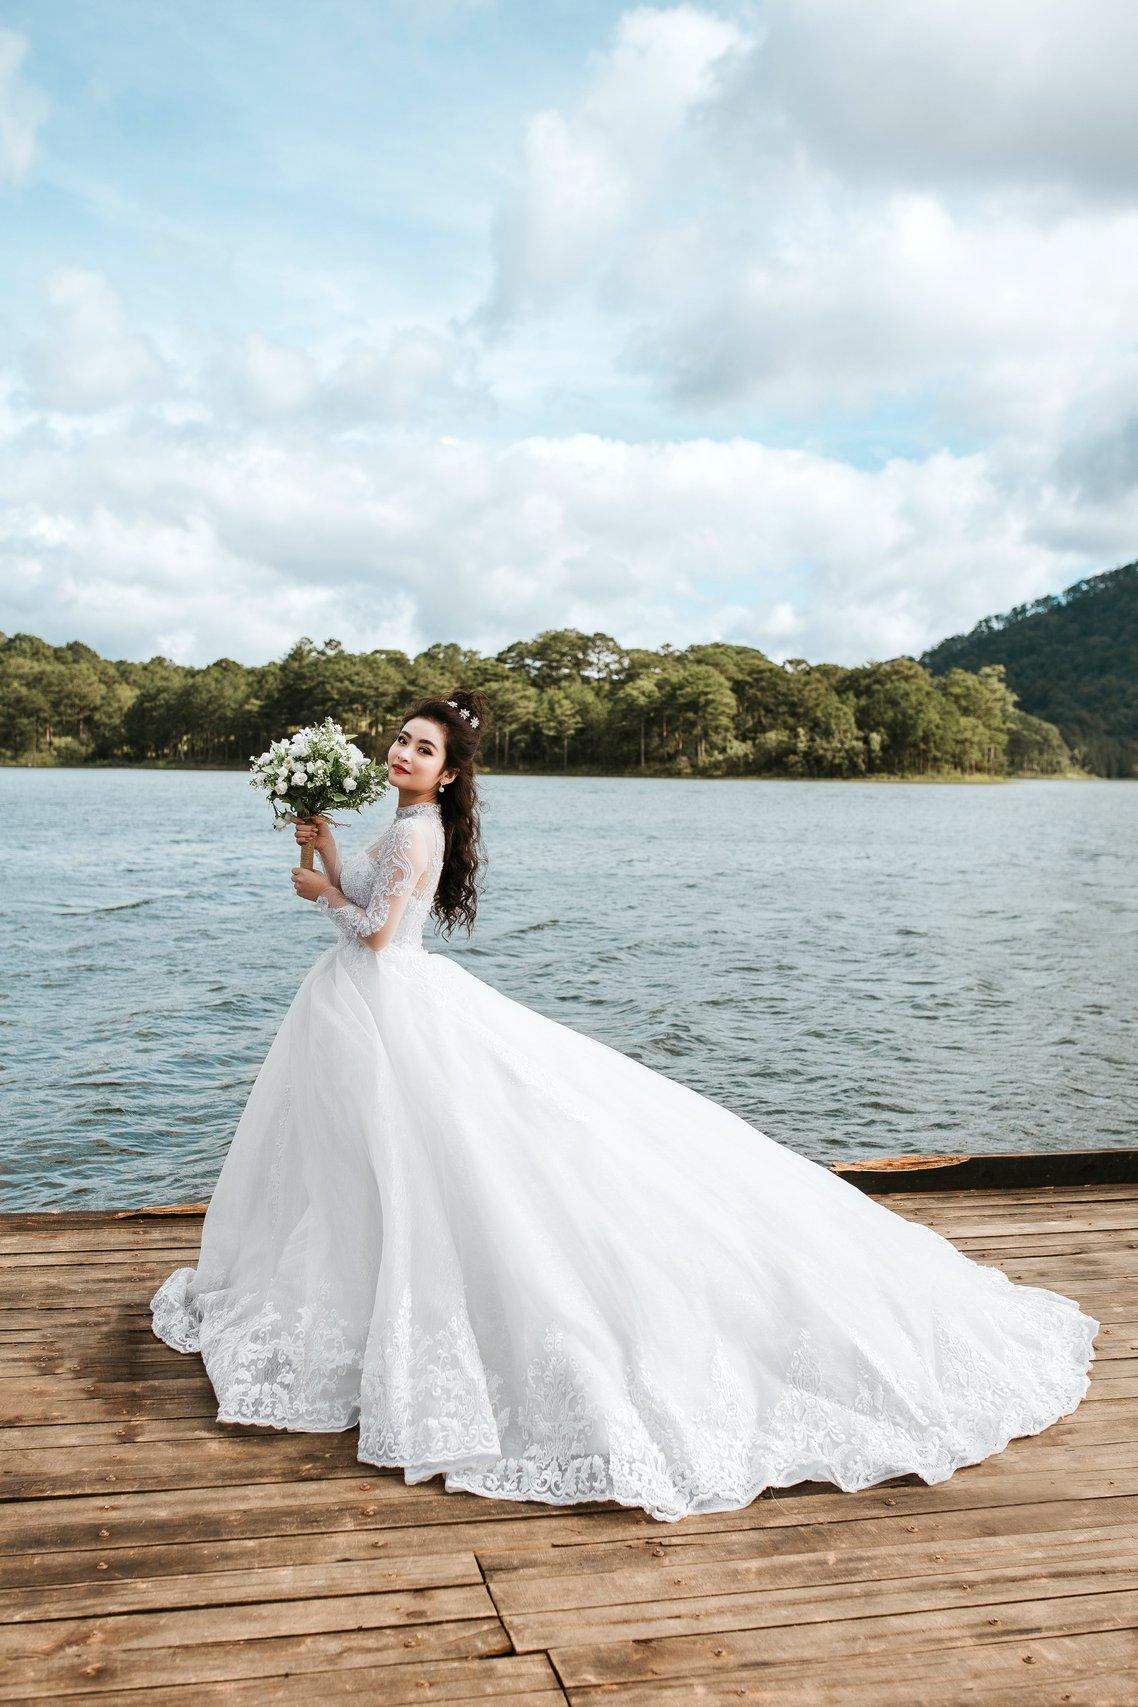 A bride standing by a lake